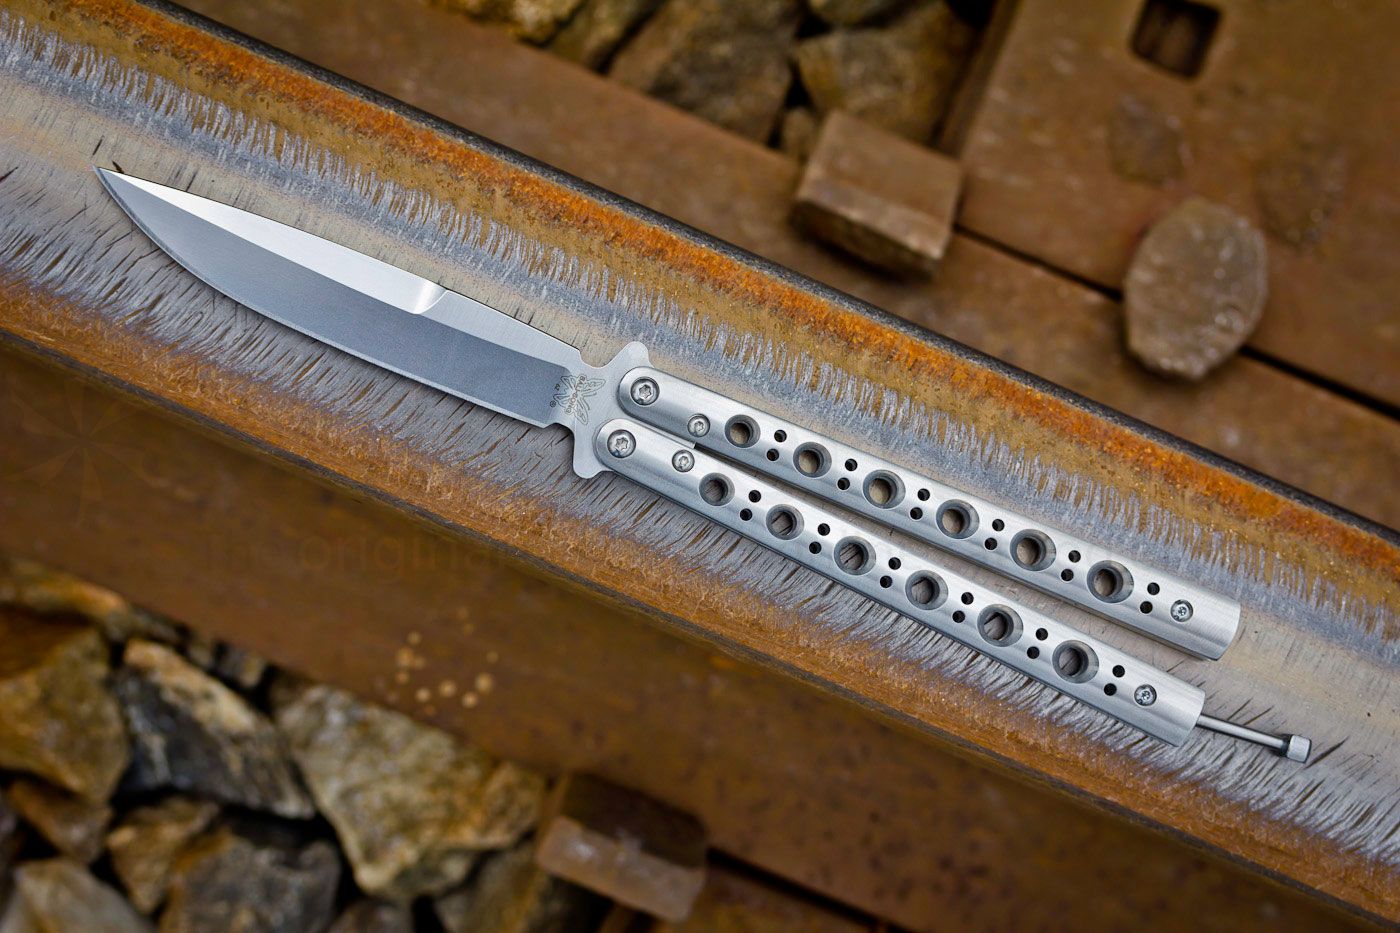 Benchmade Balisong Butterfly Knife 62 (Stainless Steel)